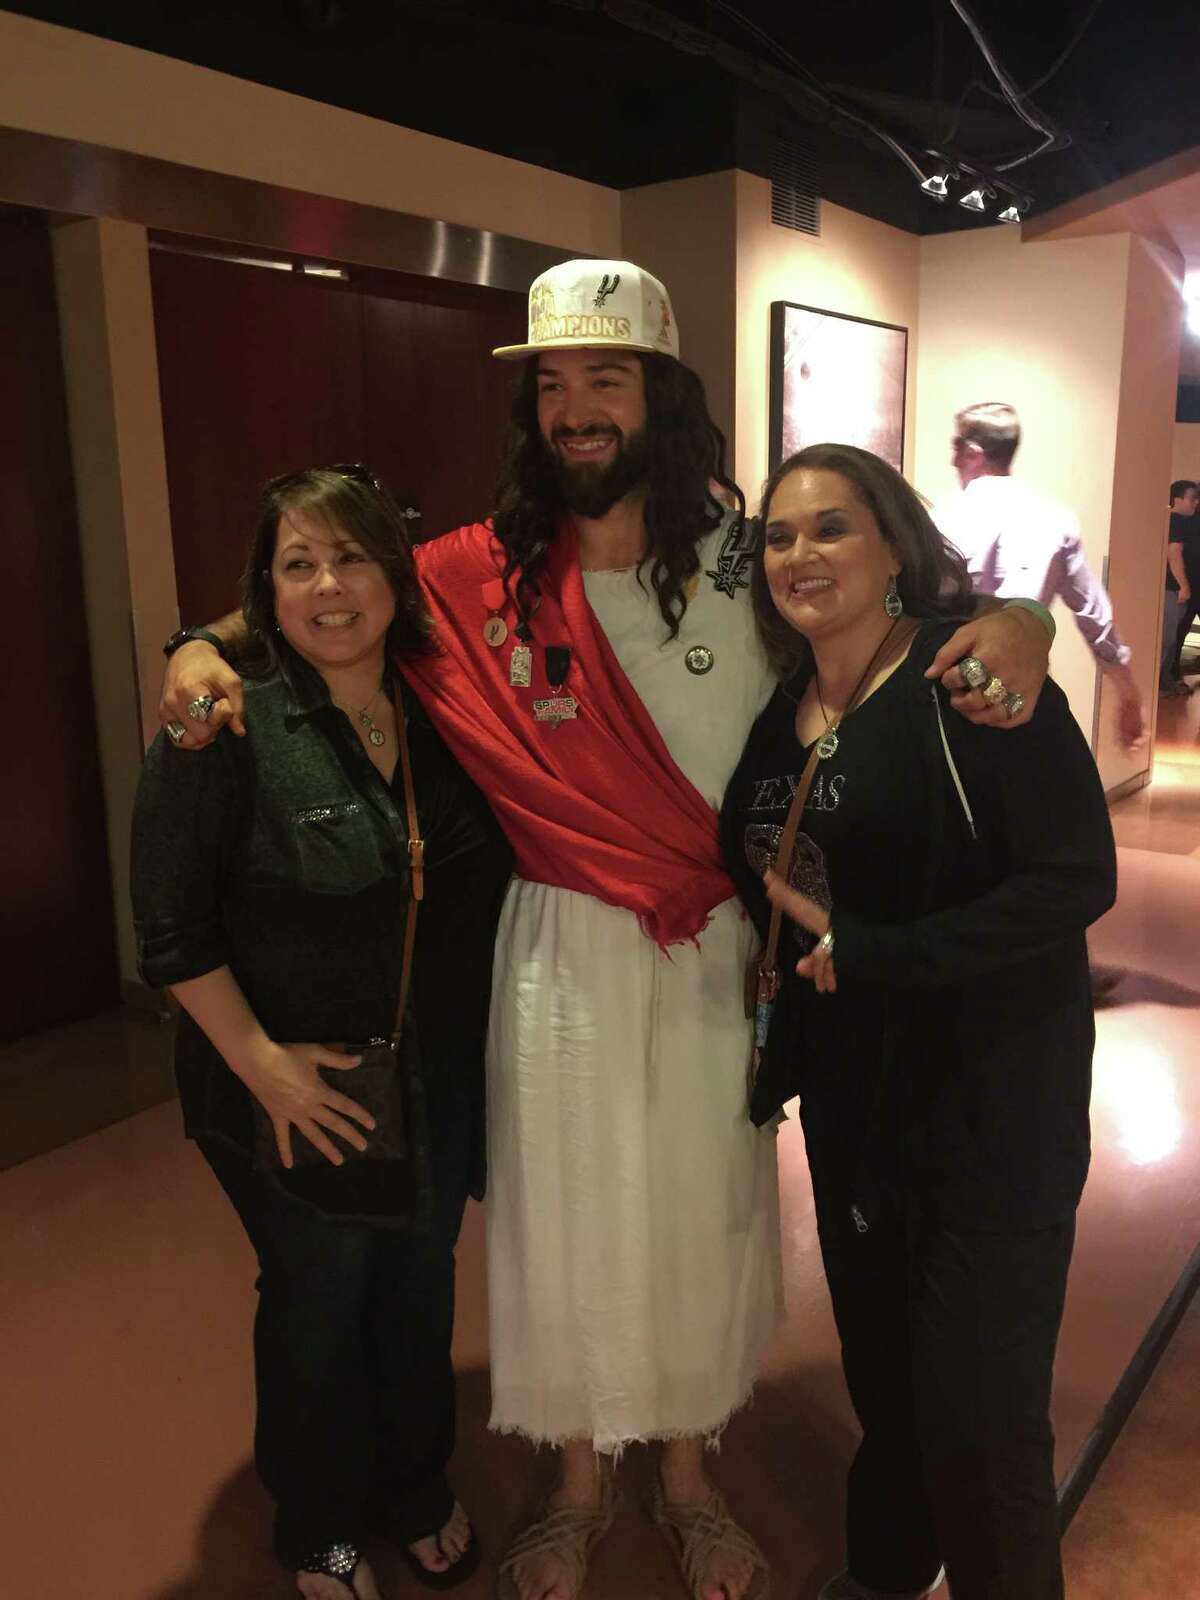 Spurs Jesus made an appearance at Sunday night's game against Golden State.